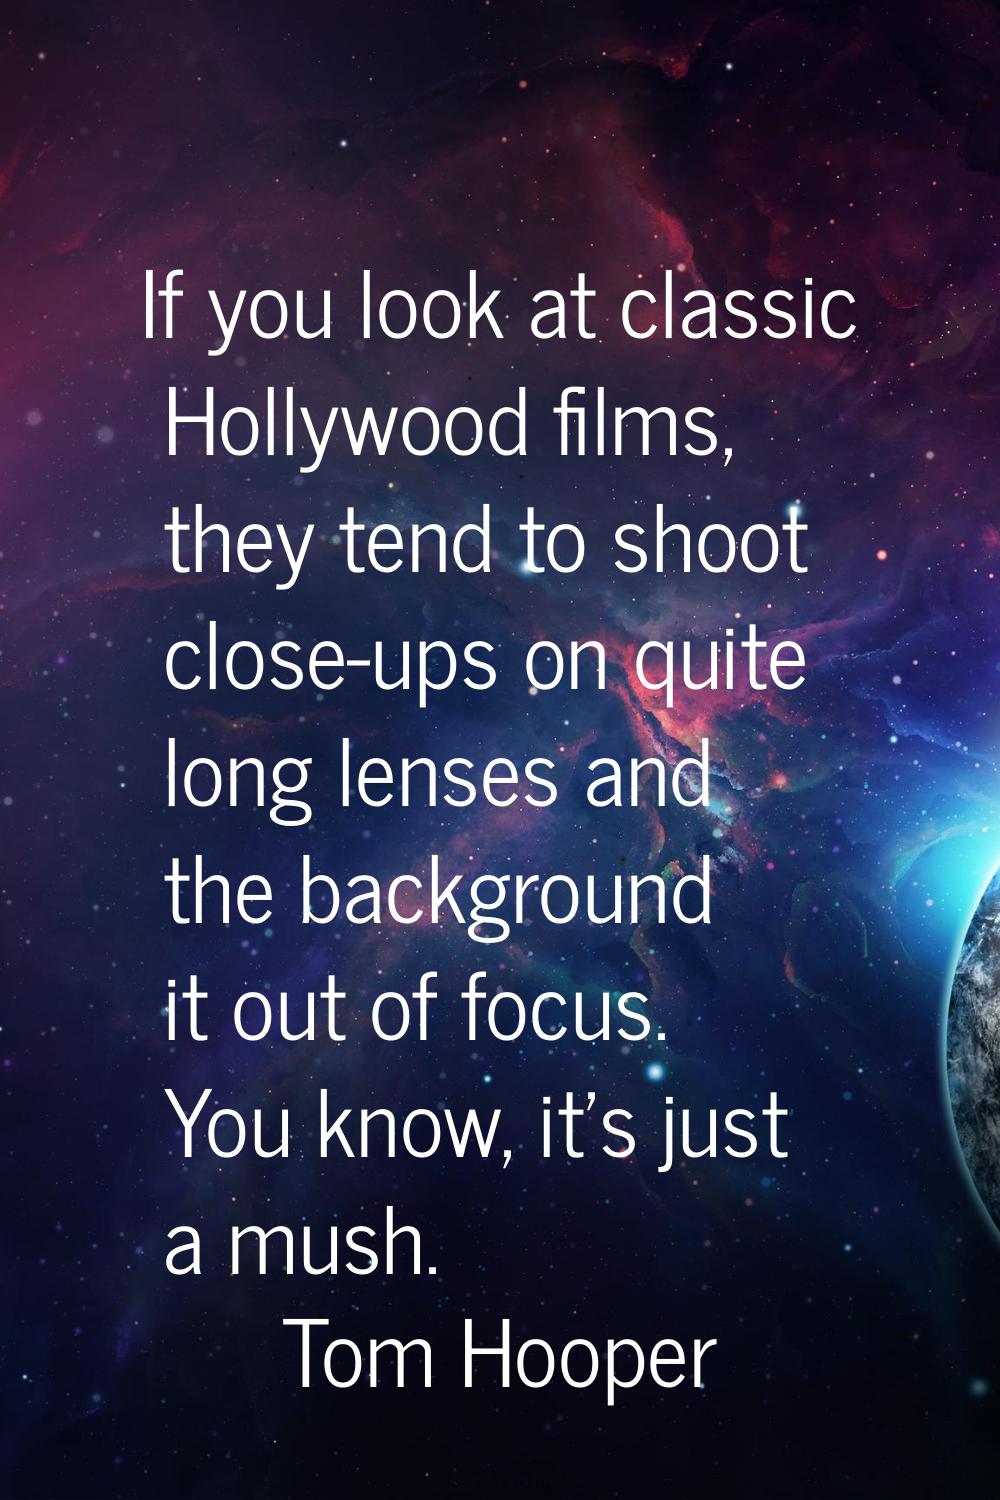 If you look at classic Hollywood films, they tend to shoot close-ups on quite long lenses and the b